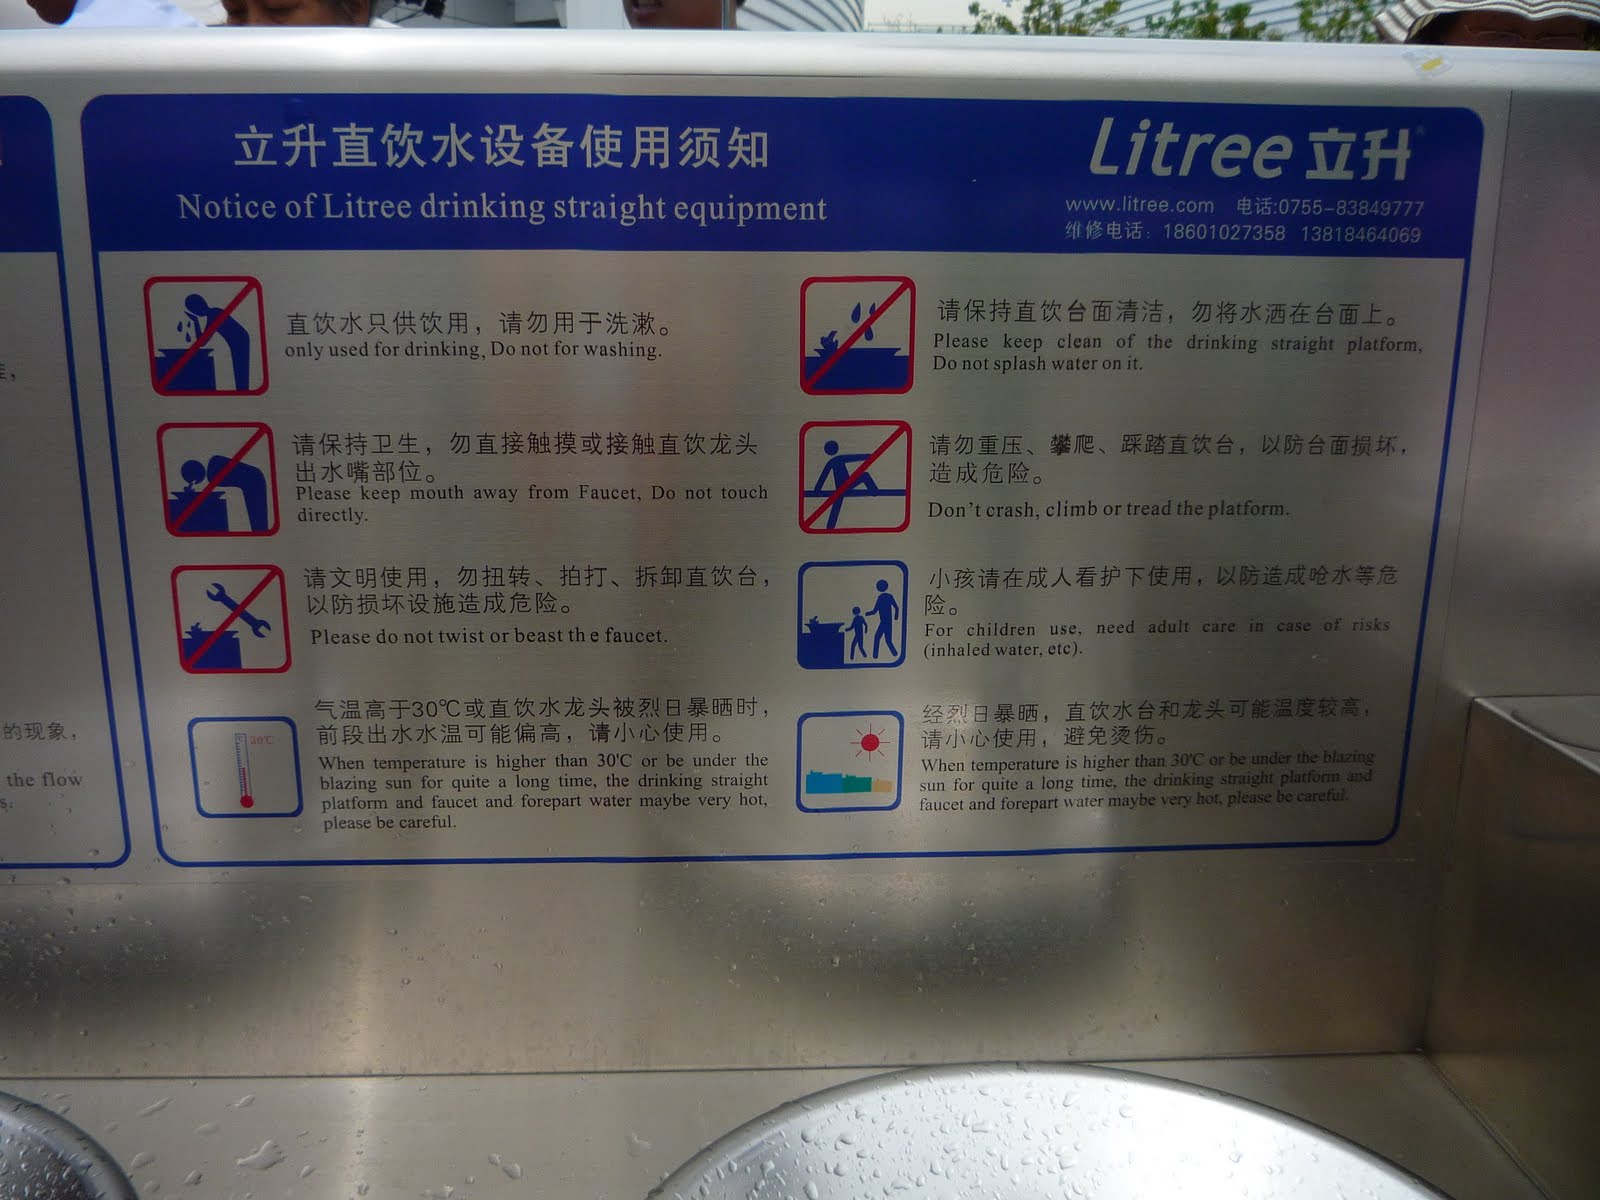 Frankie Koh: Funny Signs in China